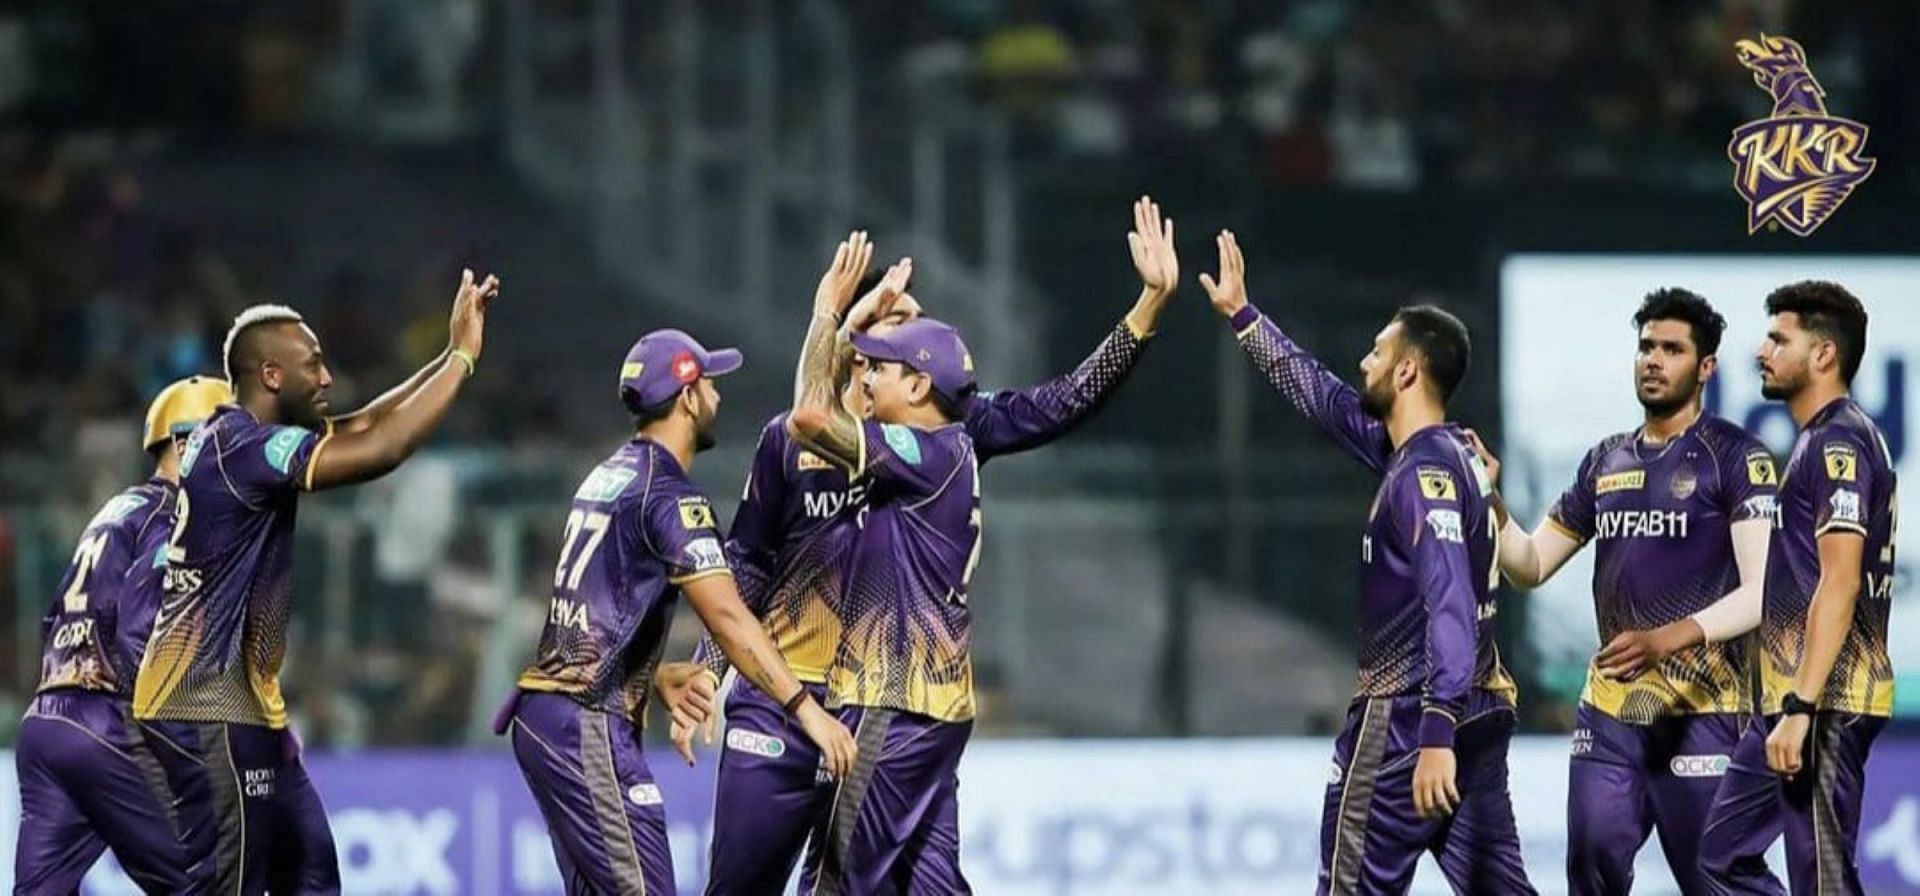 KKR were officially eliminated from the Tata IPL 2023 after the loss to LSG yesterday. [Pic Credit - KKR]